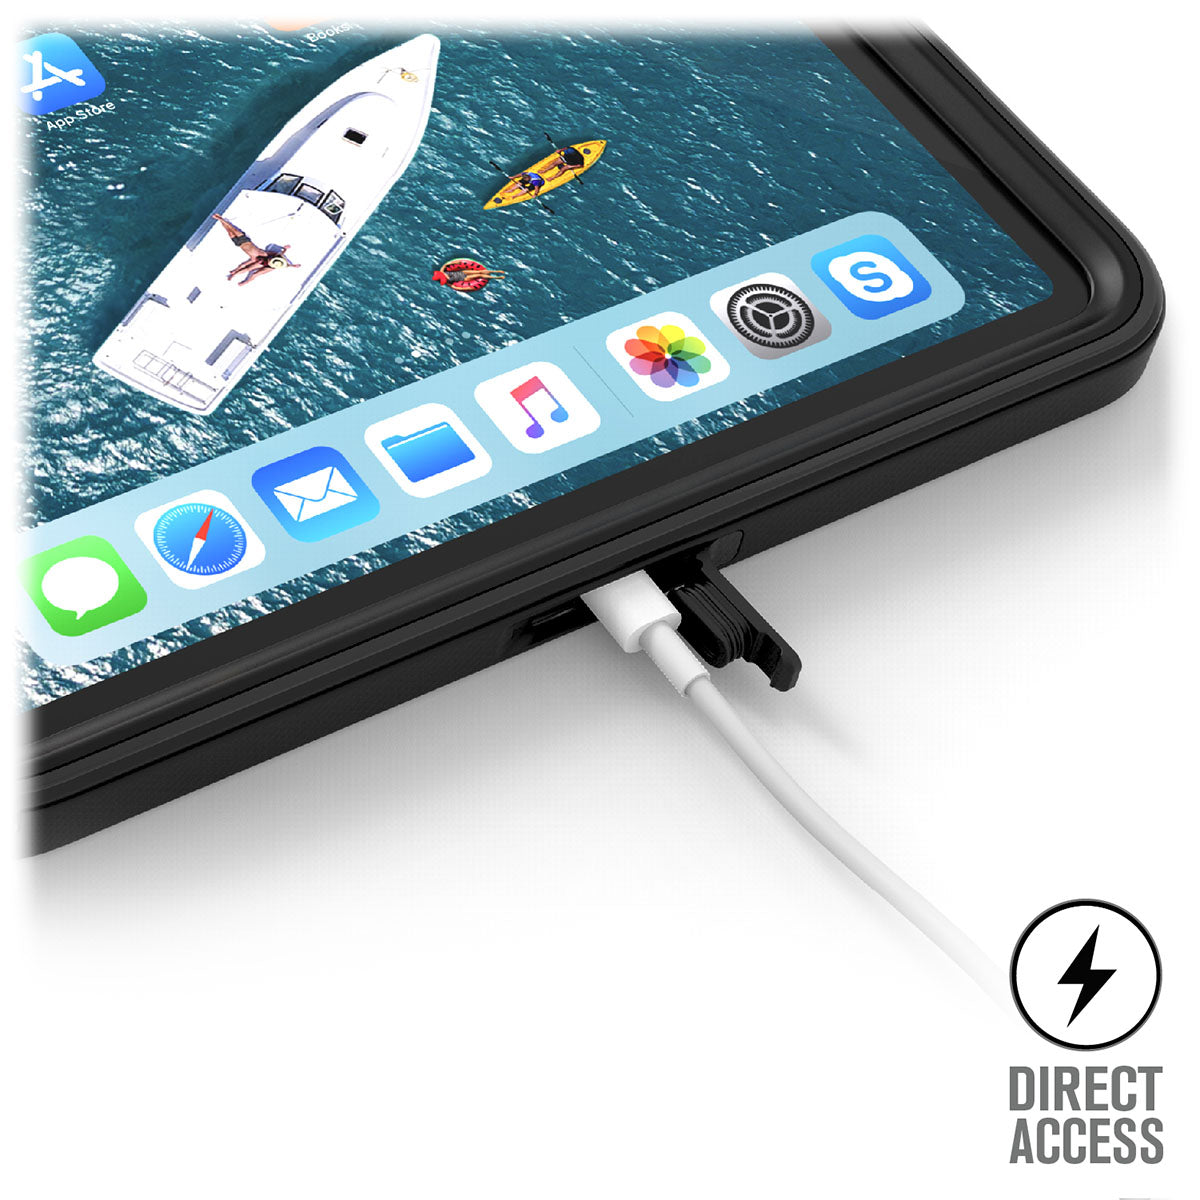 catalyst ipad air gen 3 10.5 waterproof case plugged into the charging cable text reads direct access